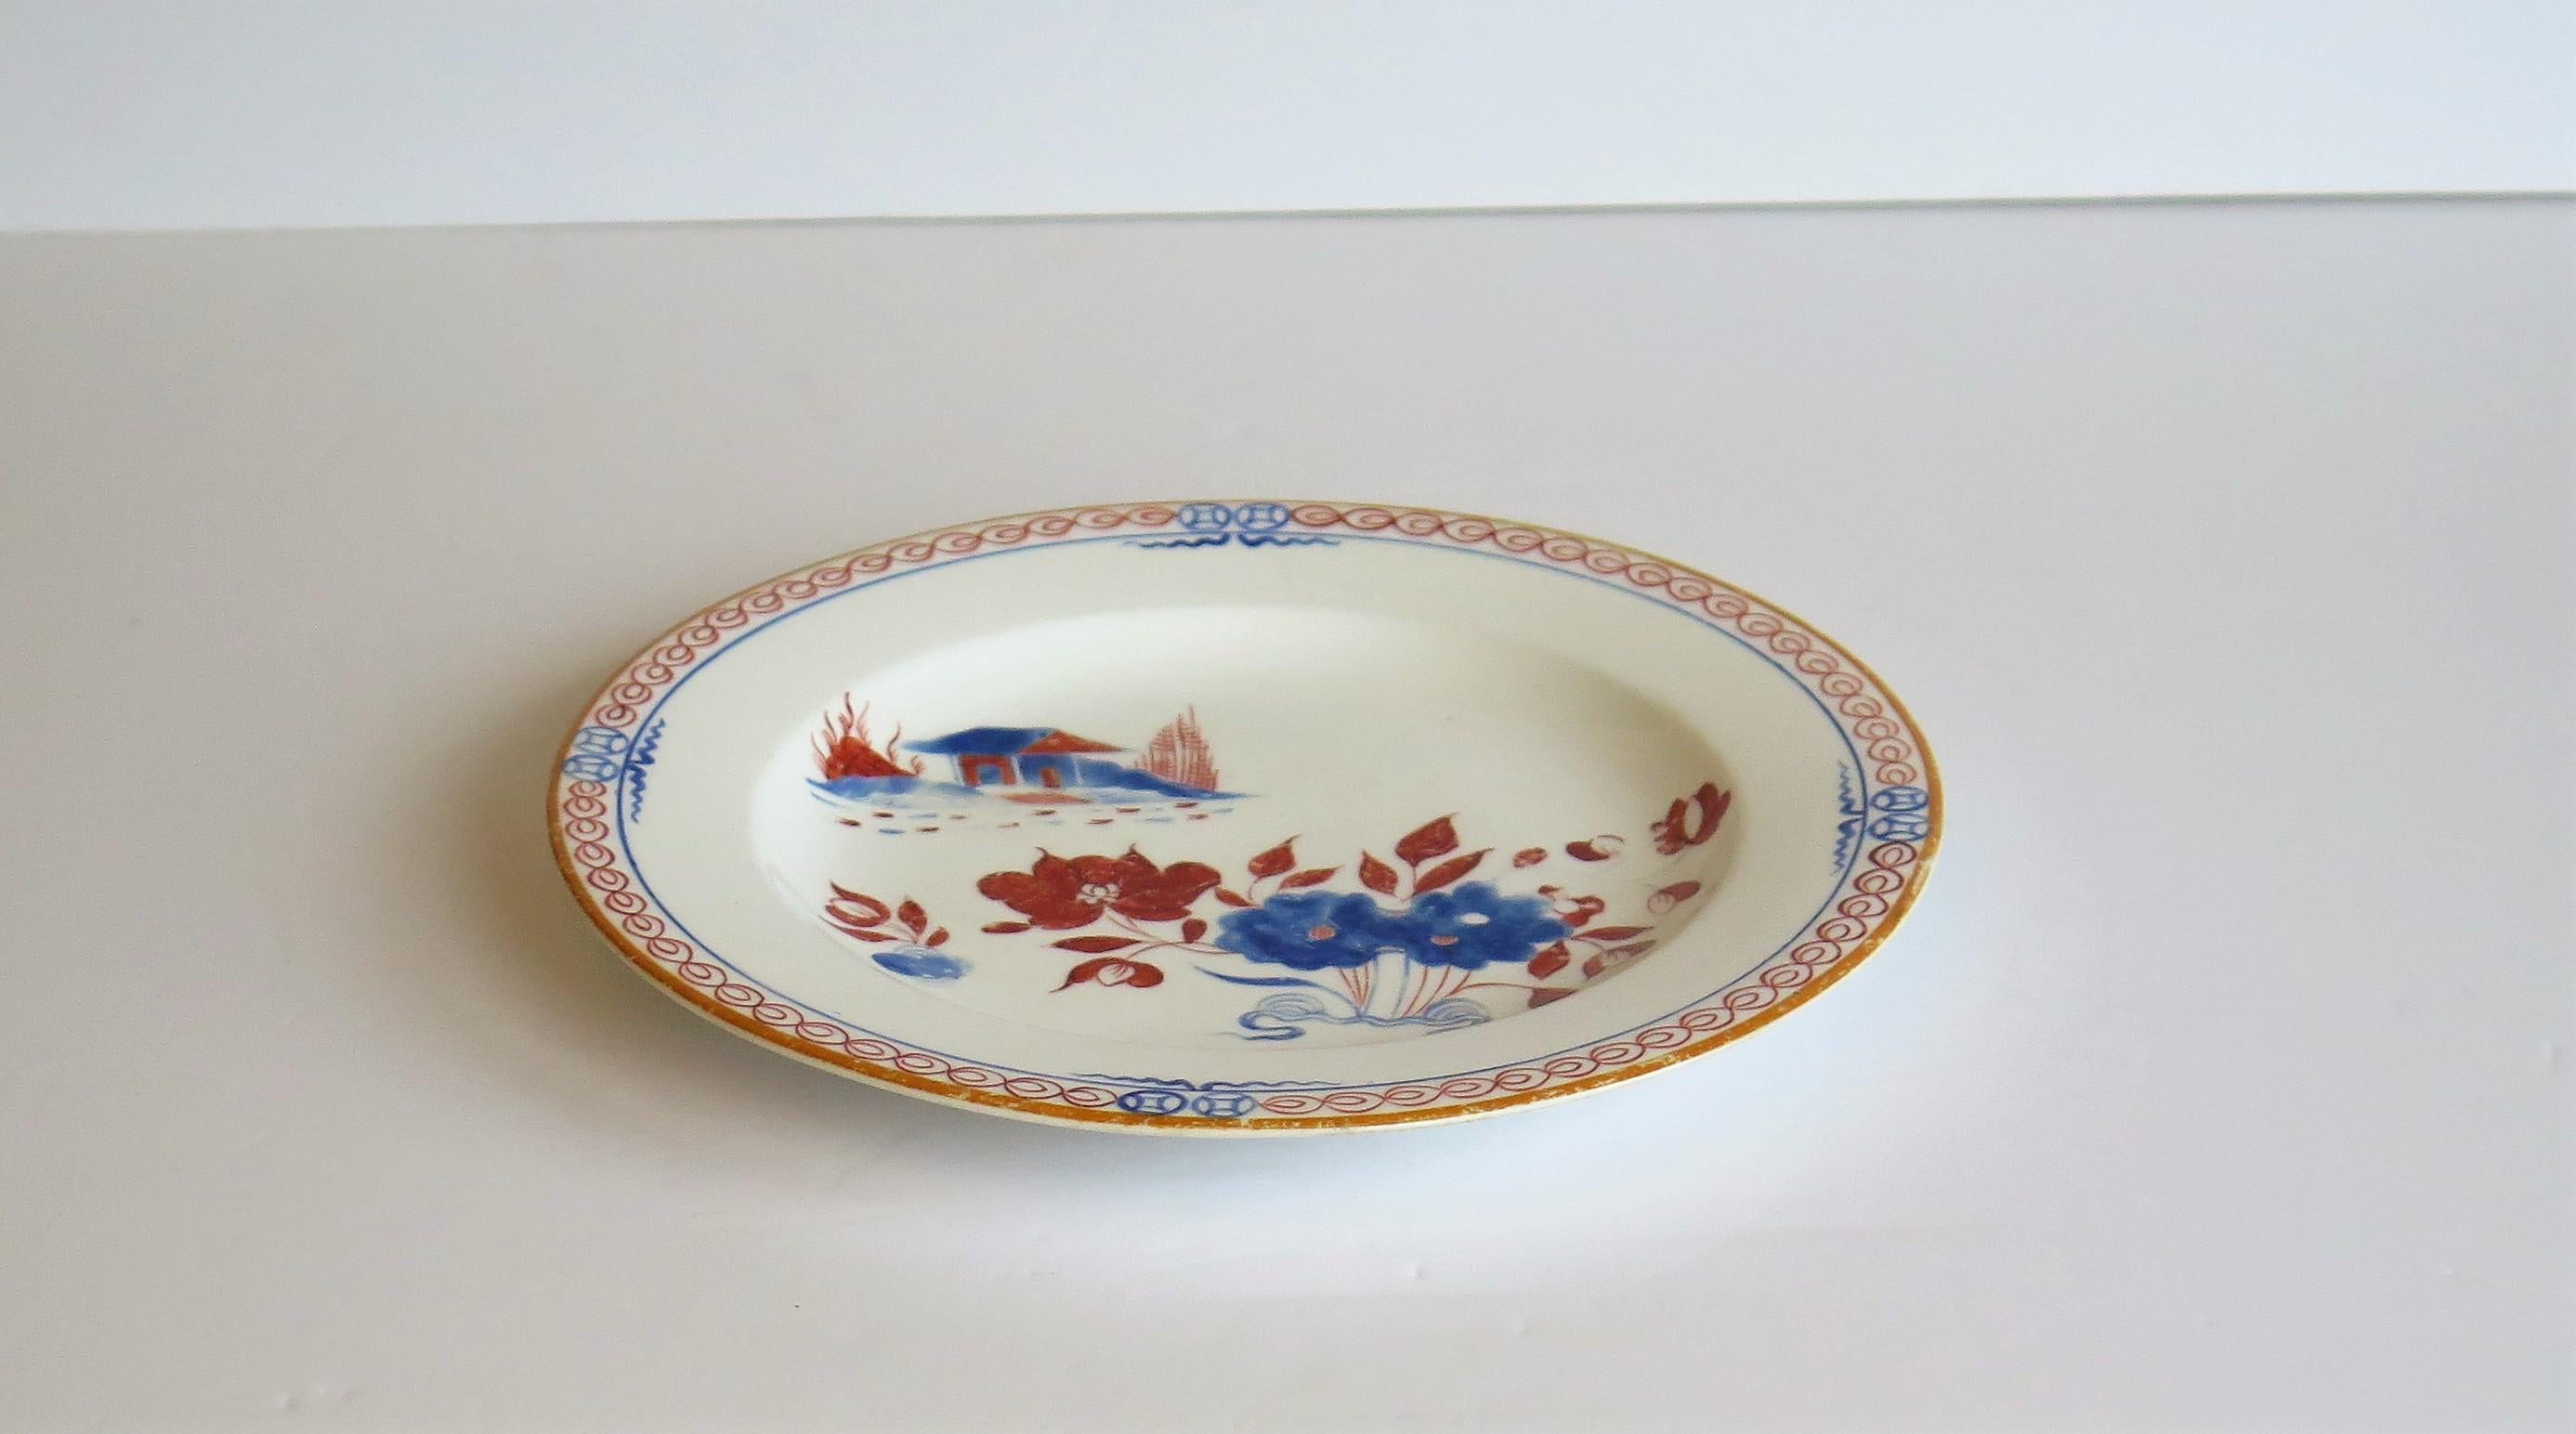 Early 19th C. Spode Plate or Dish Porcelain Hand Painted Dolls House Pattern 488 For Sale 6